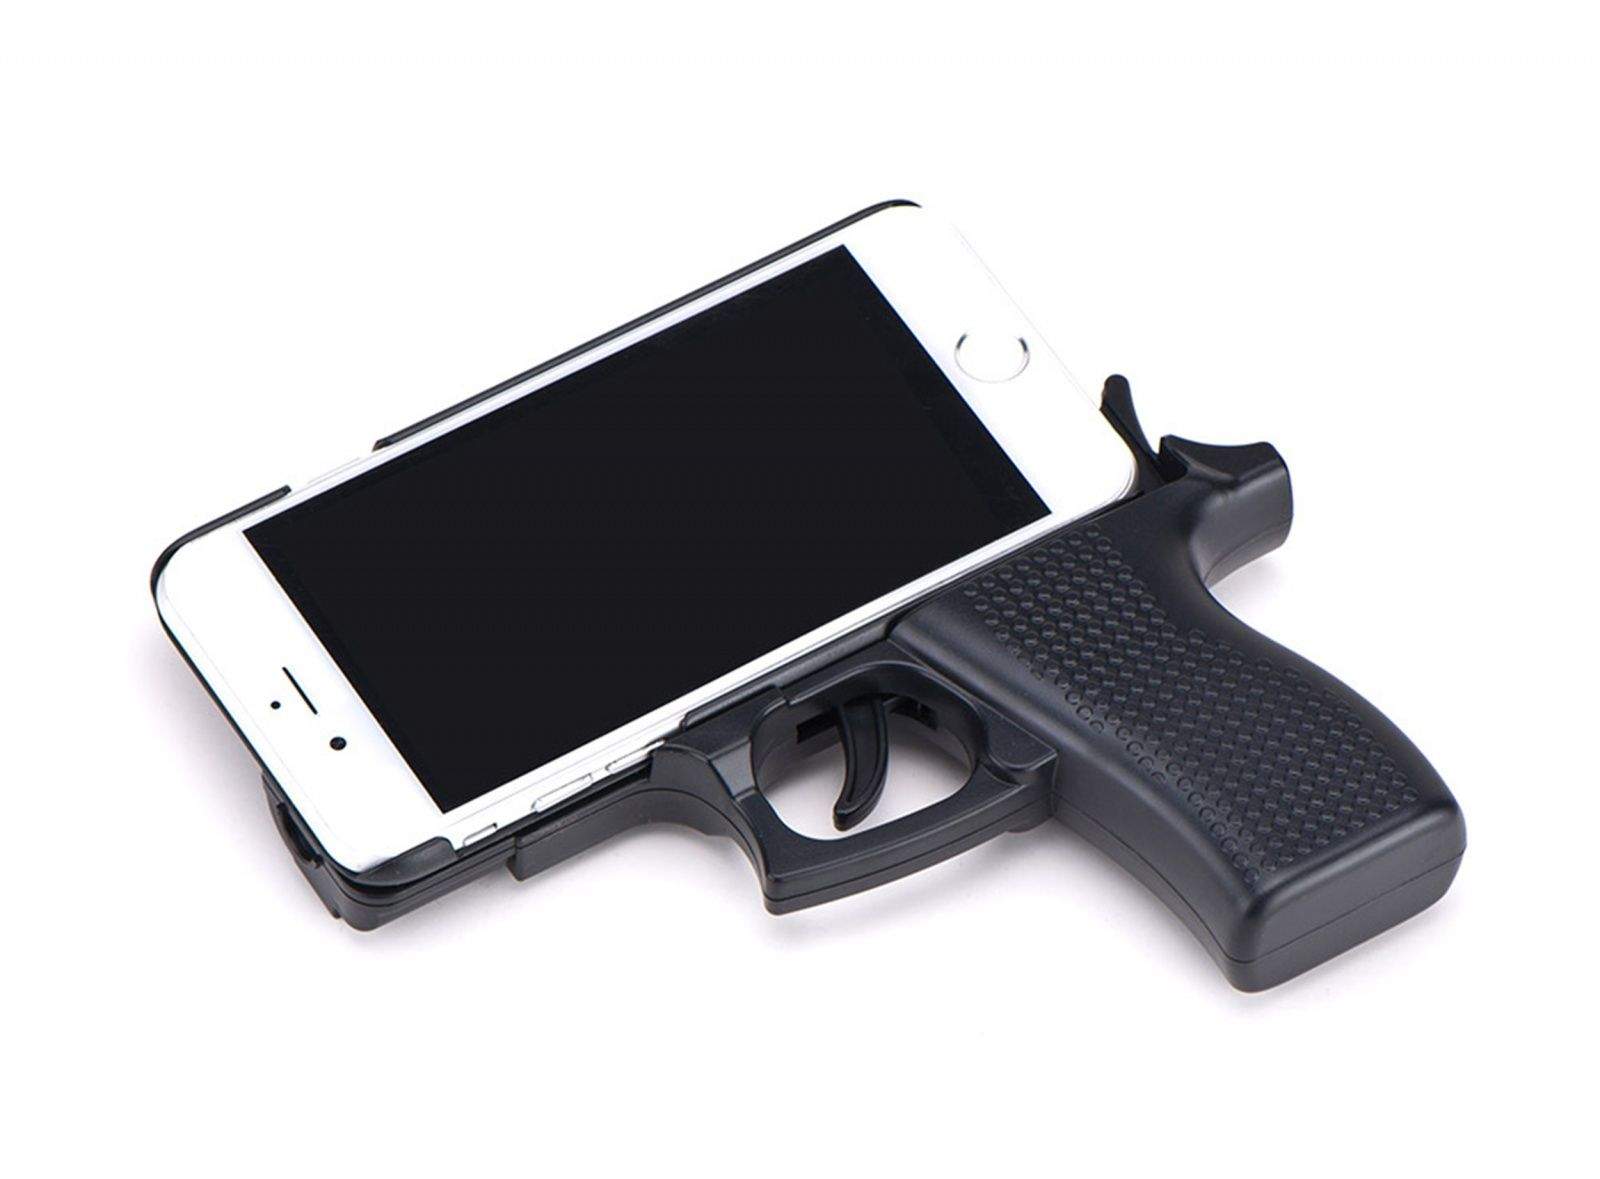 Should you really encase your iPhone in something that looks like a weapon.?